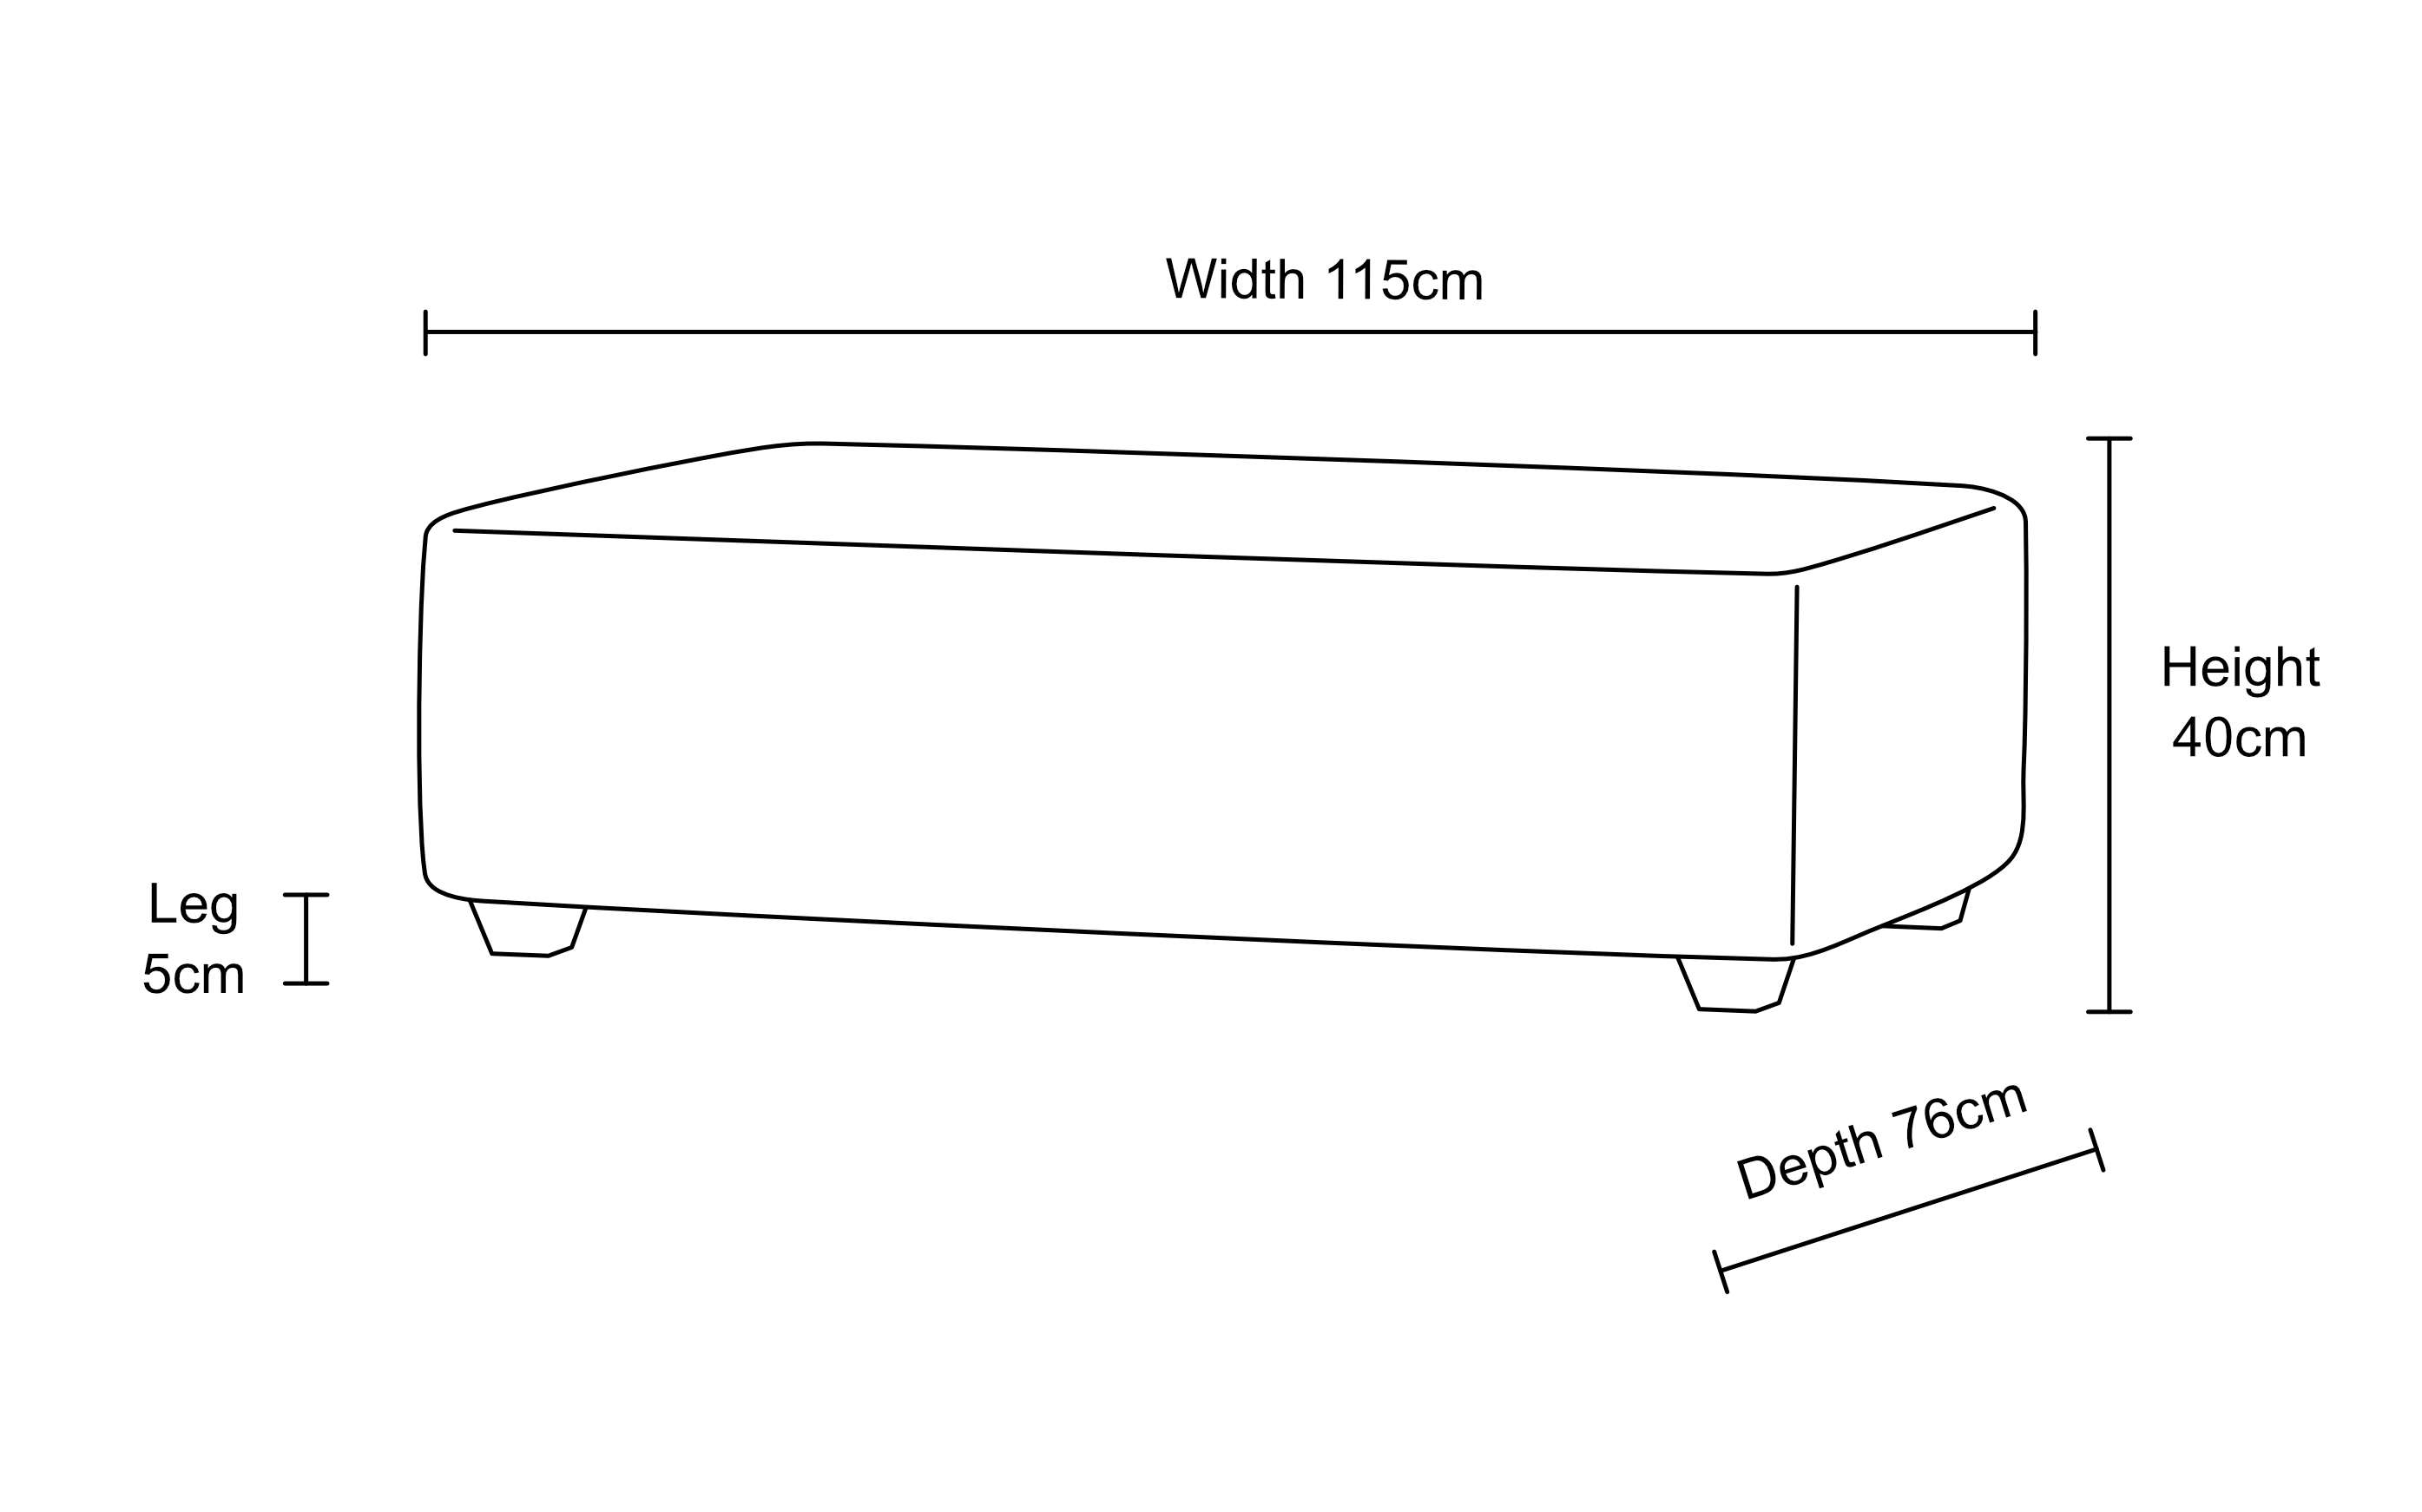 https://www.footstools.co.uk/wp-content/uploads/footstool-coffee-table-45x30-dimensions.jpg